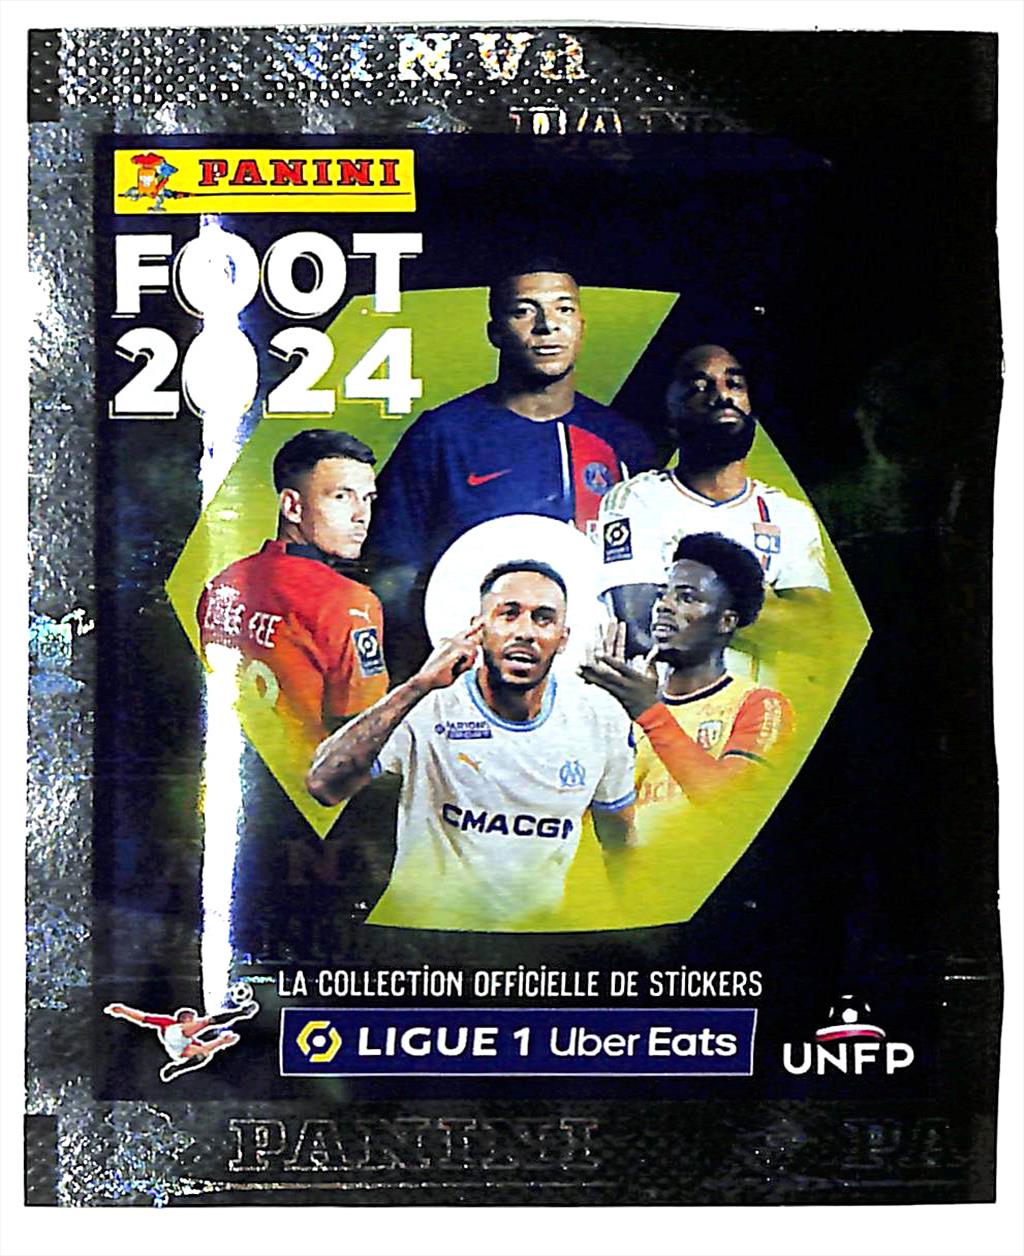 PANINI « FOOT 2023 LIGUE 1 UBER EATS STICKERS » : fiche